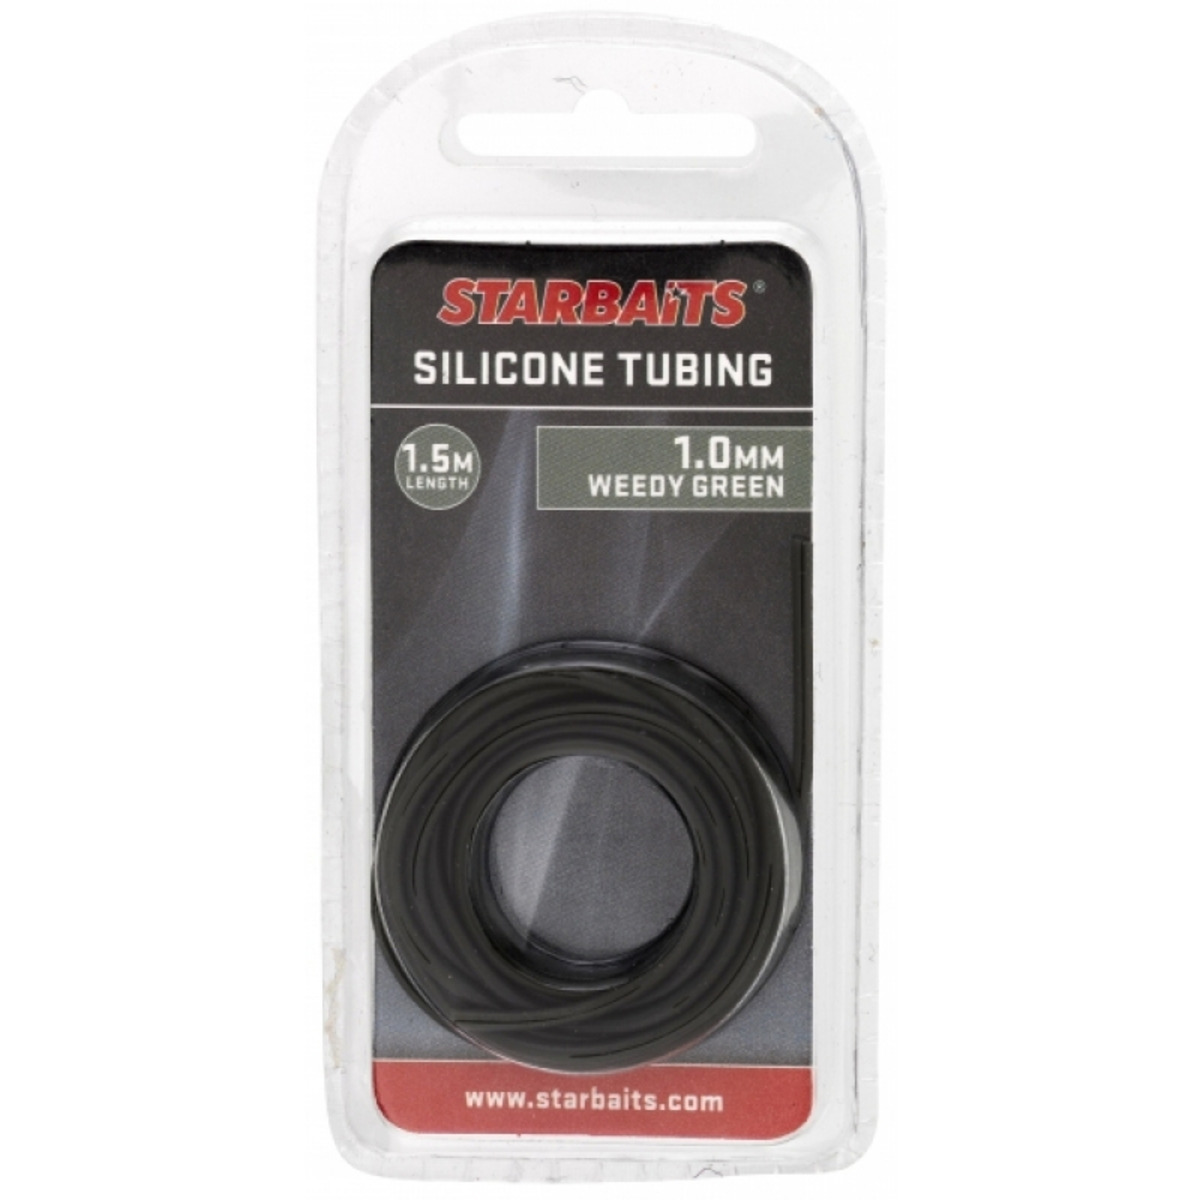 Starbaits Silicone Tubing 1.0mm - WEEDY GREEN